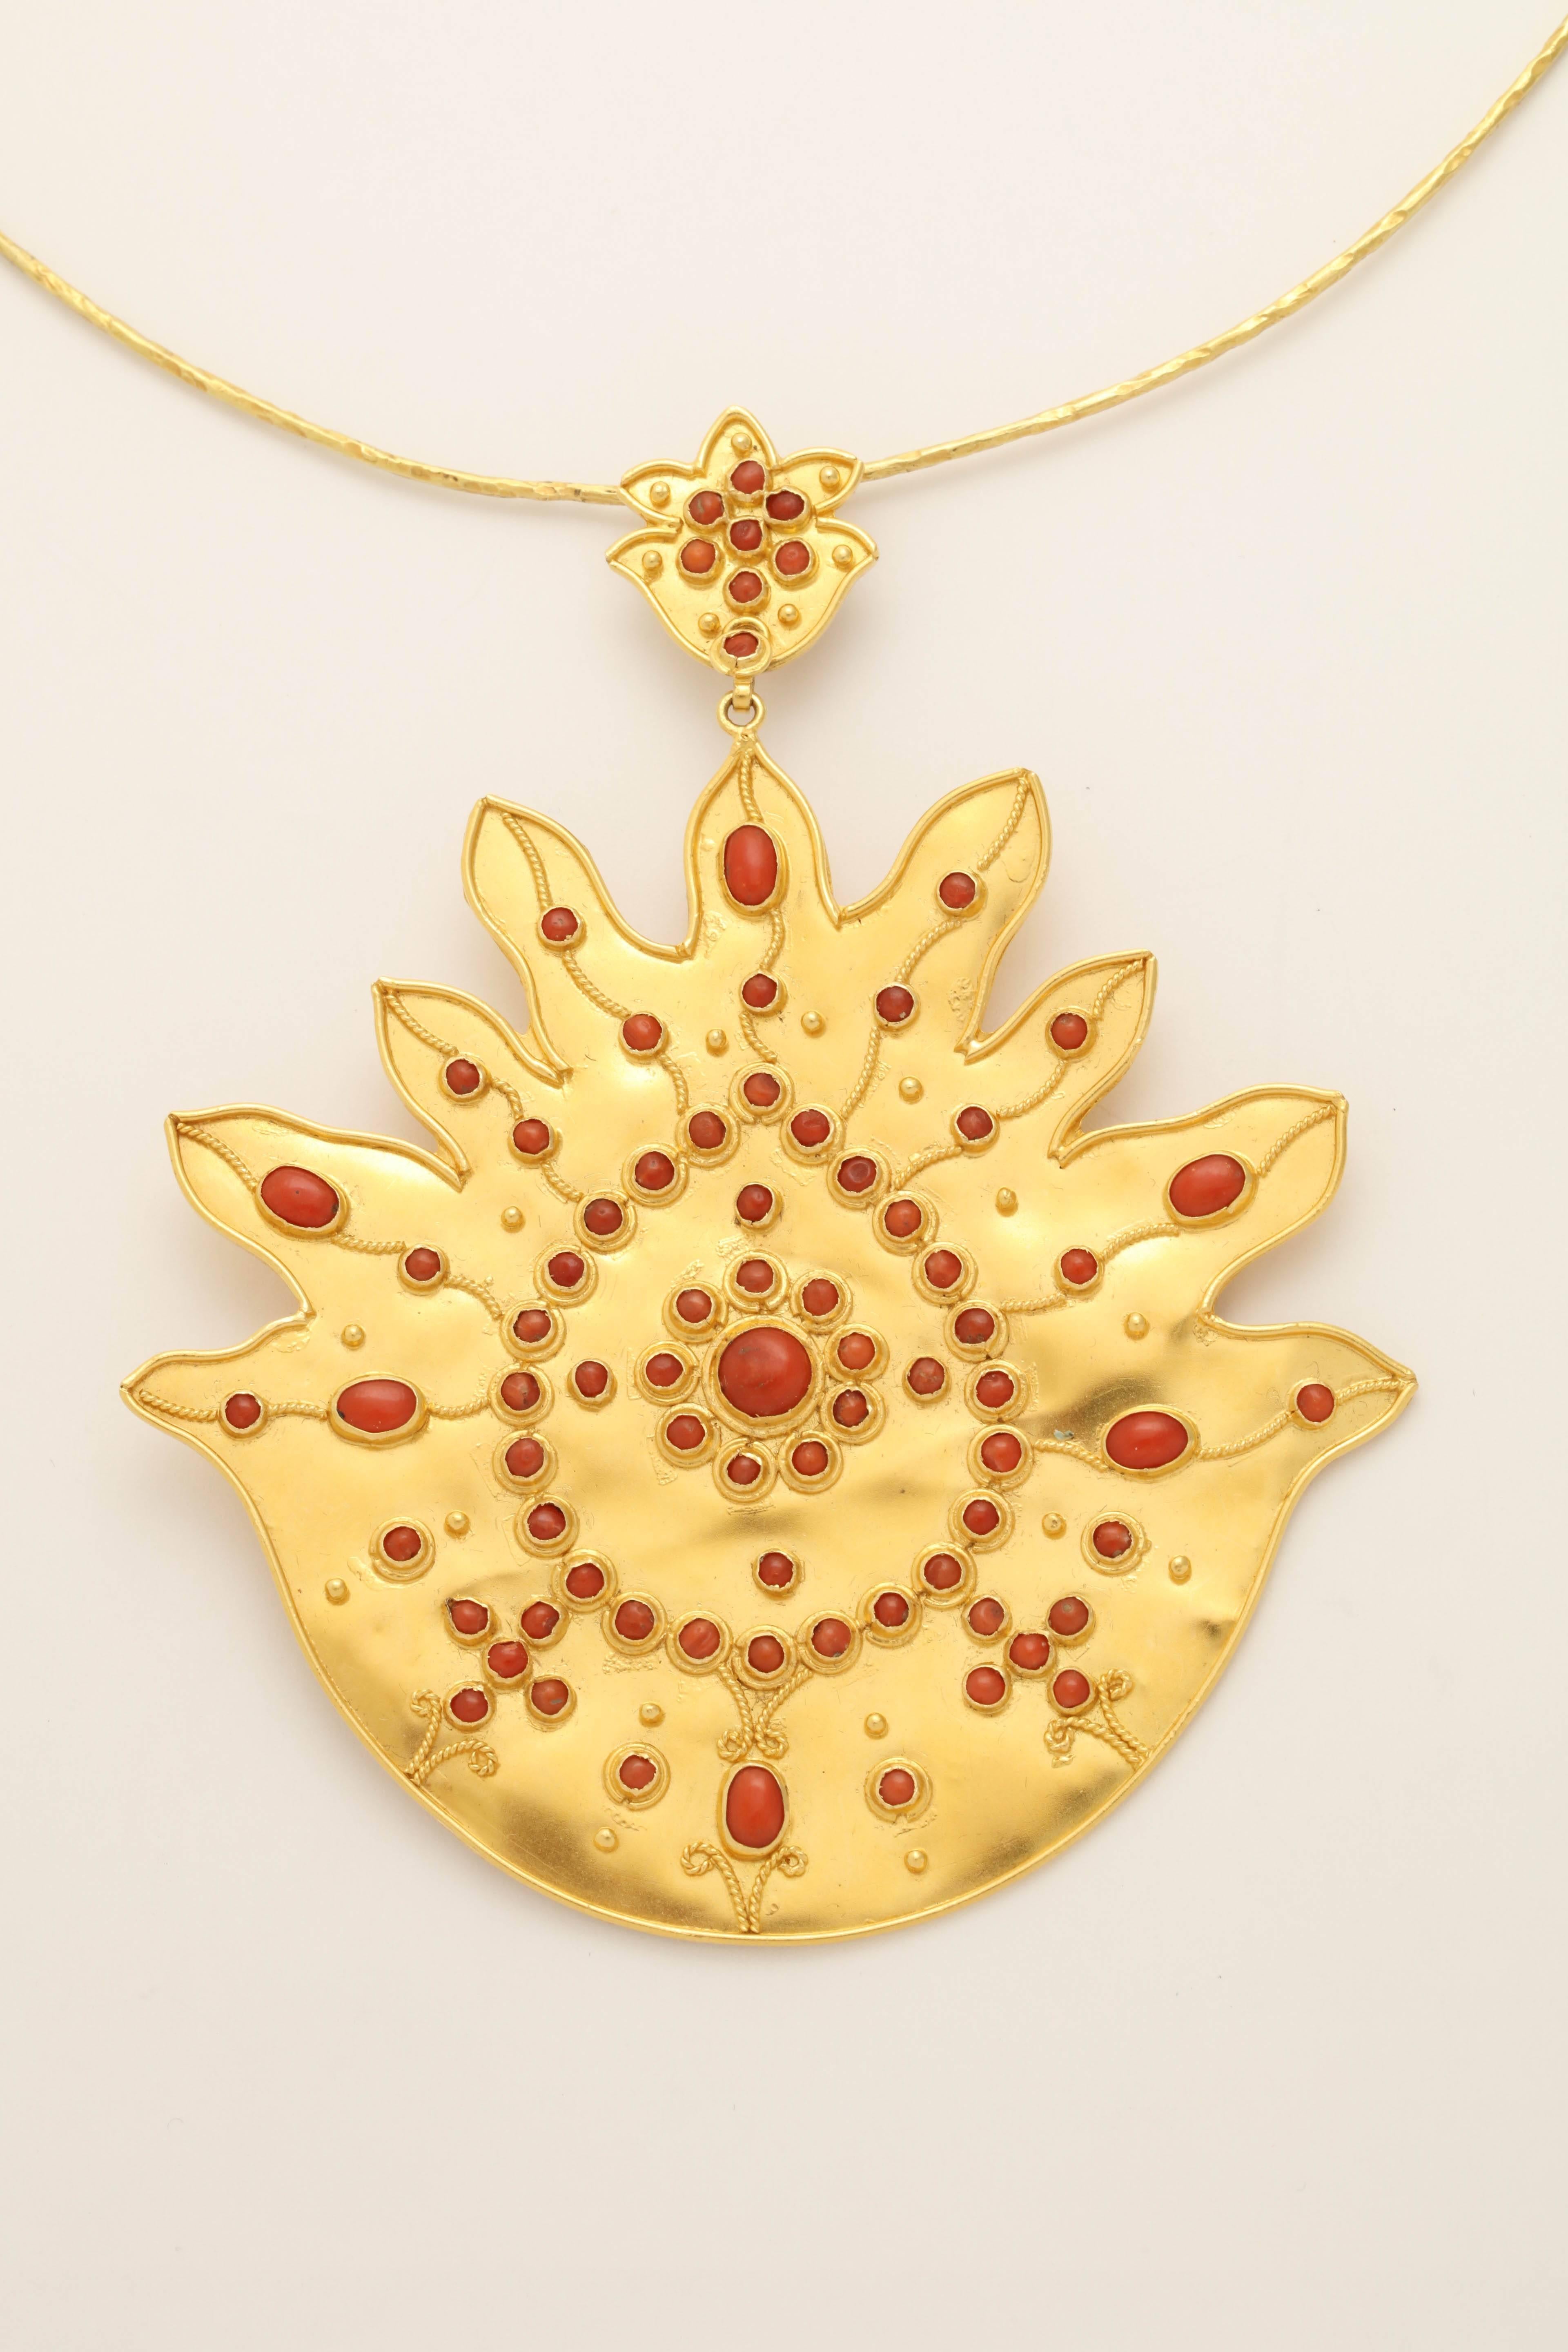 An 18kt yellow gold flame pendant with an 18kt yellow gold wire necklace . The pendant is decorated with 18kt yellow gold rope, granulation and bezel set oval and round cabochon coral beads.

Pendant length: 4.15 inches
Pendant width: 3.35